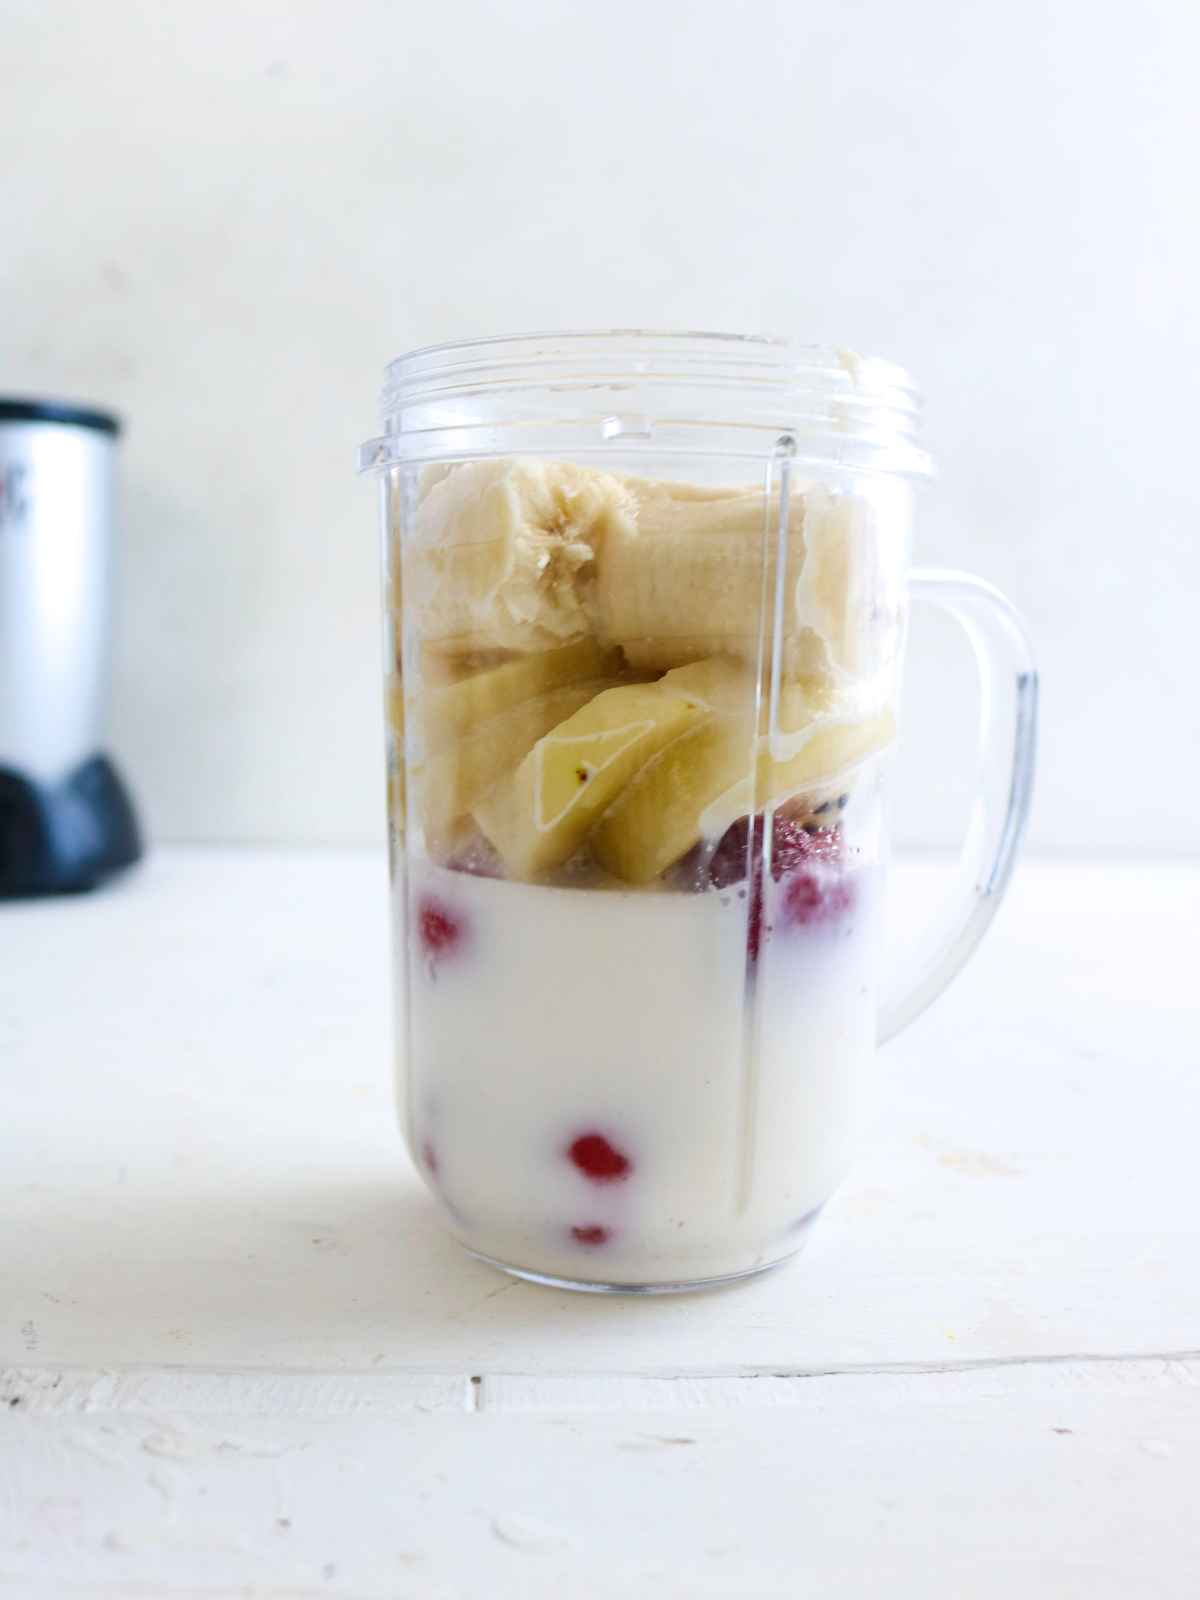 kiwi, banana, strawberry and almond milk placed in a blender jug.